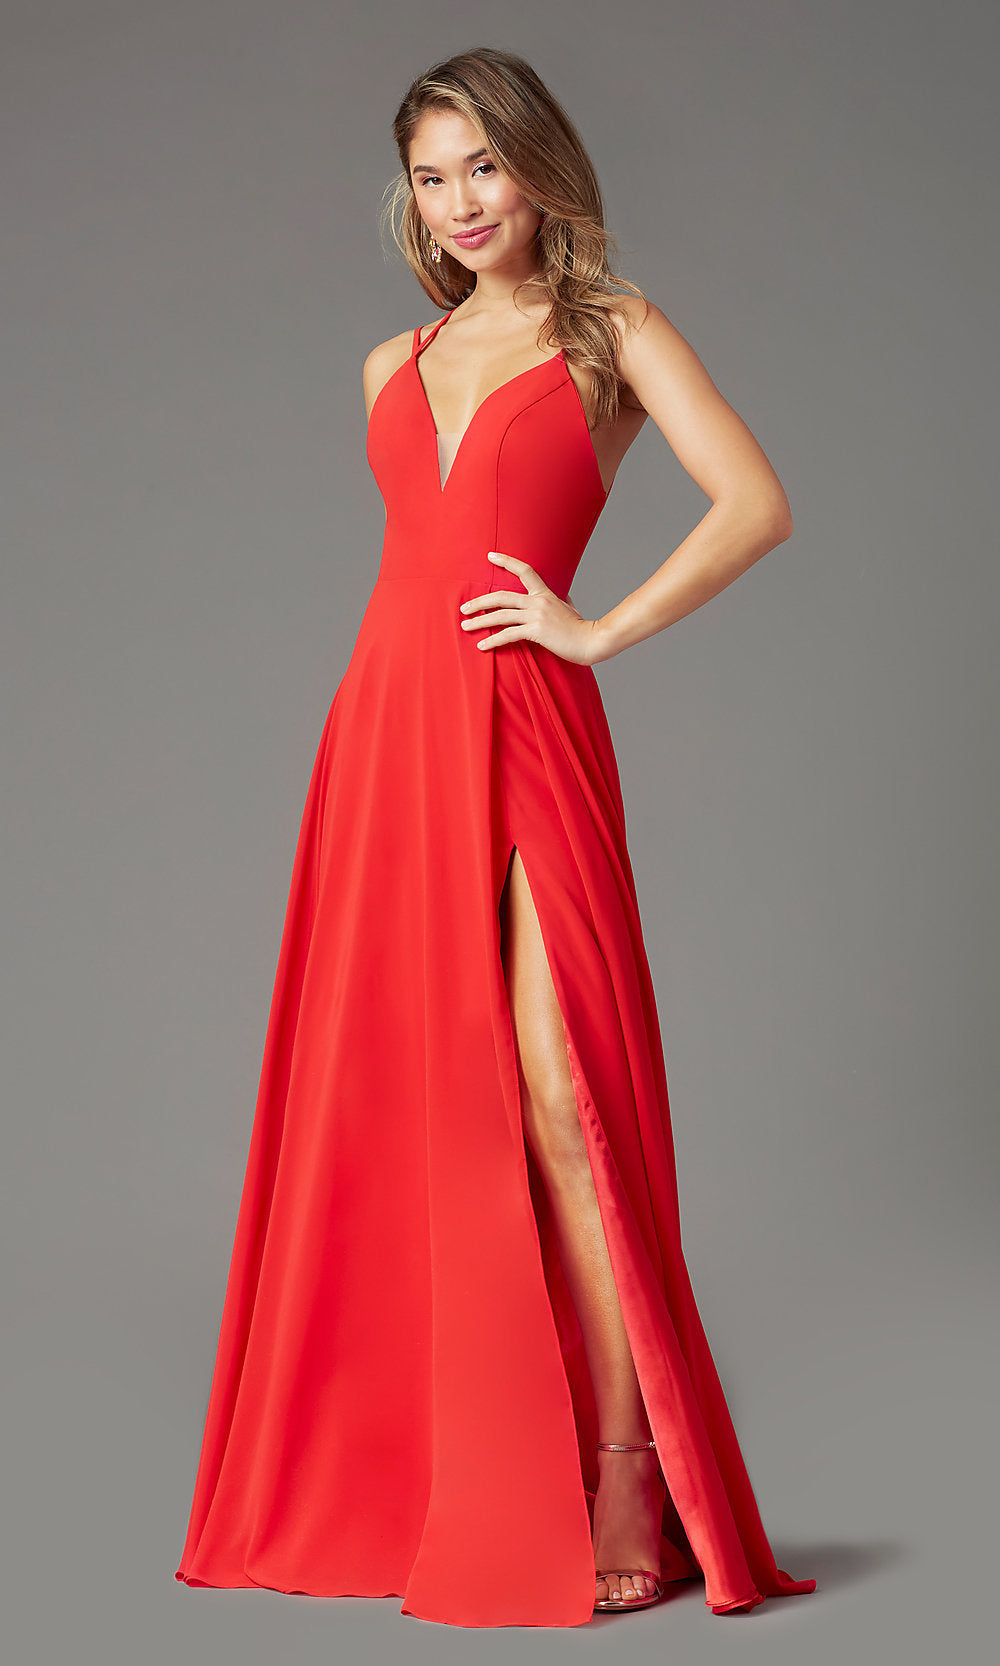 Hot Chili Caged-Back Long Formal Prom Dress by PromGirl